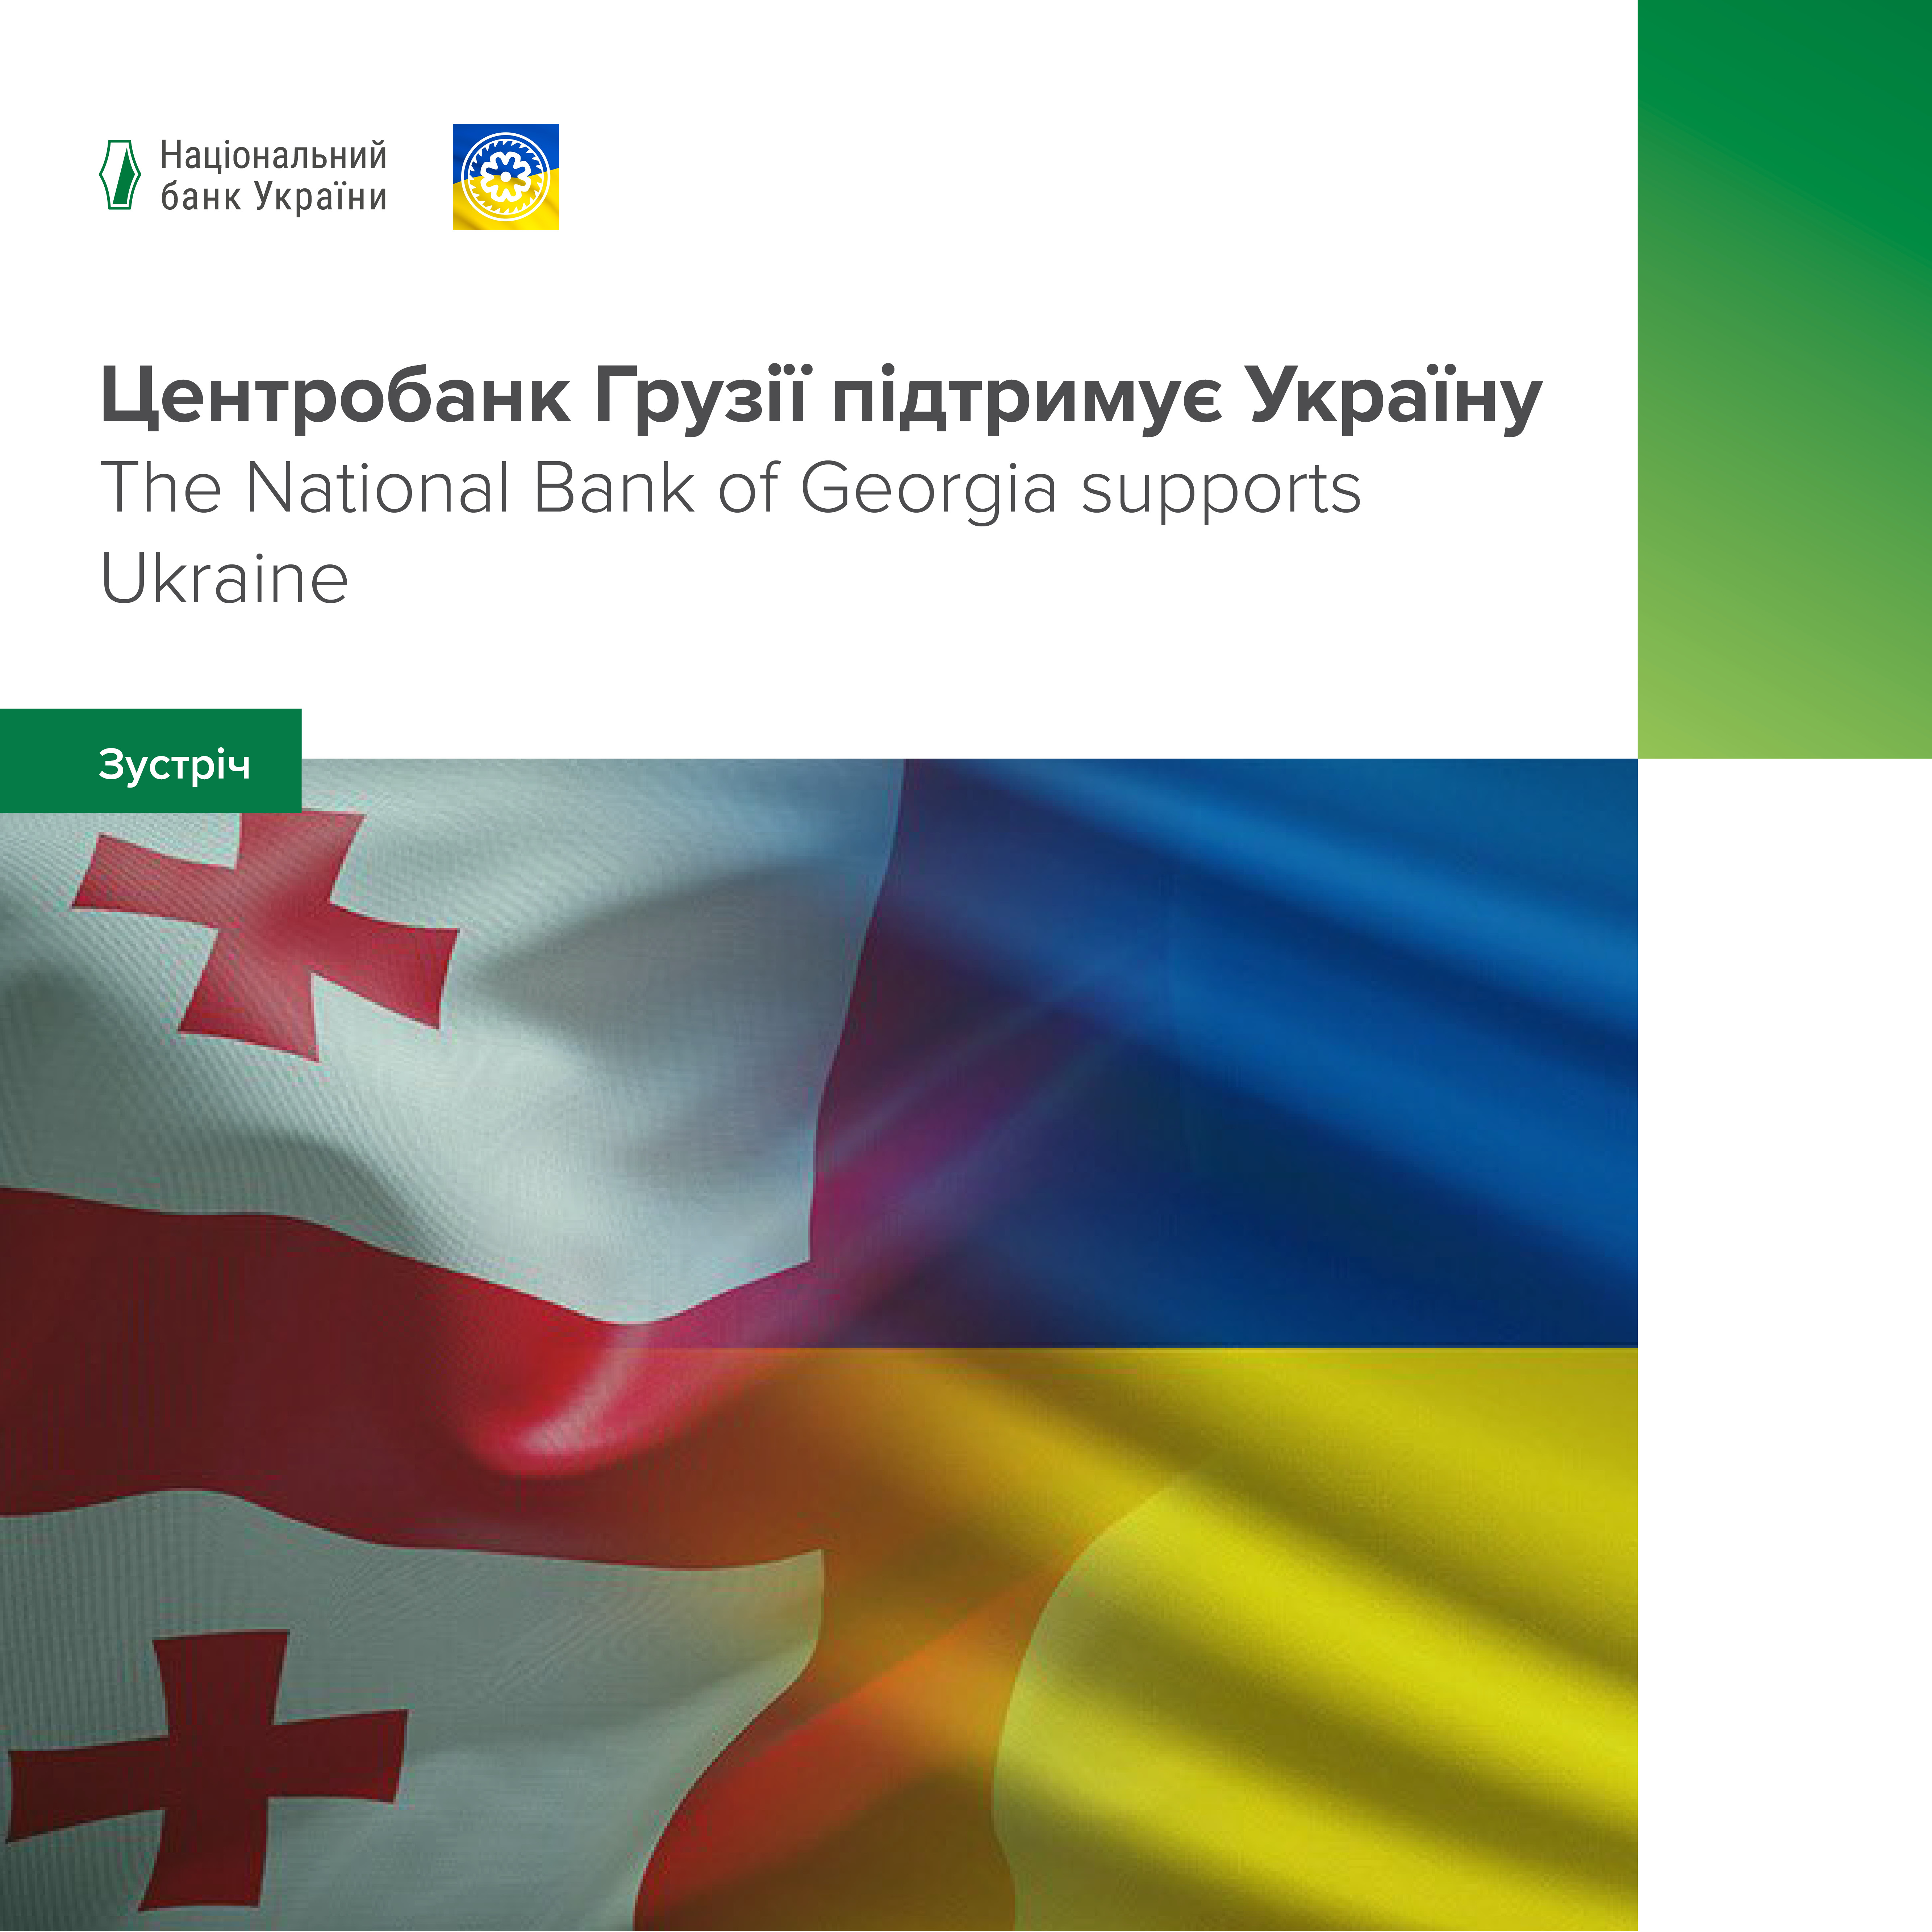 The National Bank of Georgia supports Ukraine